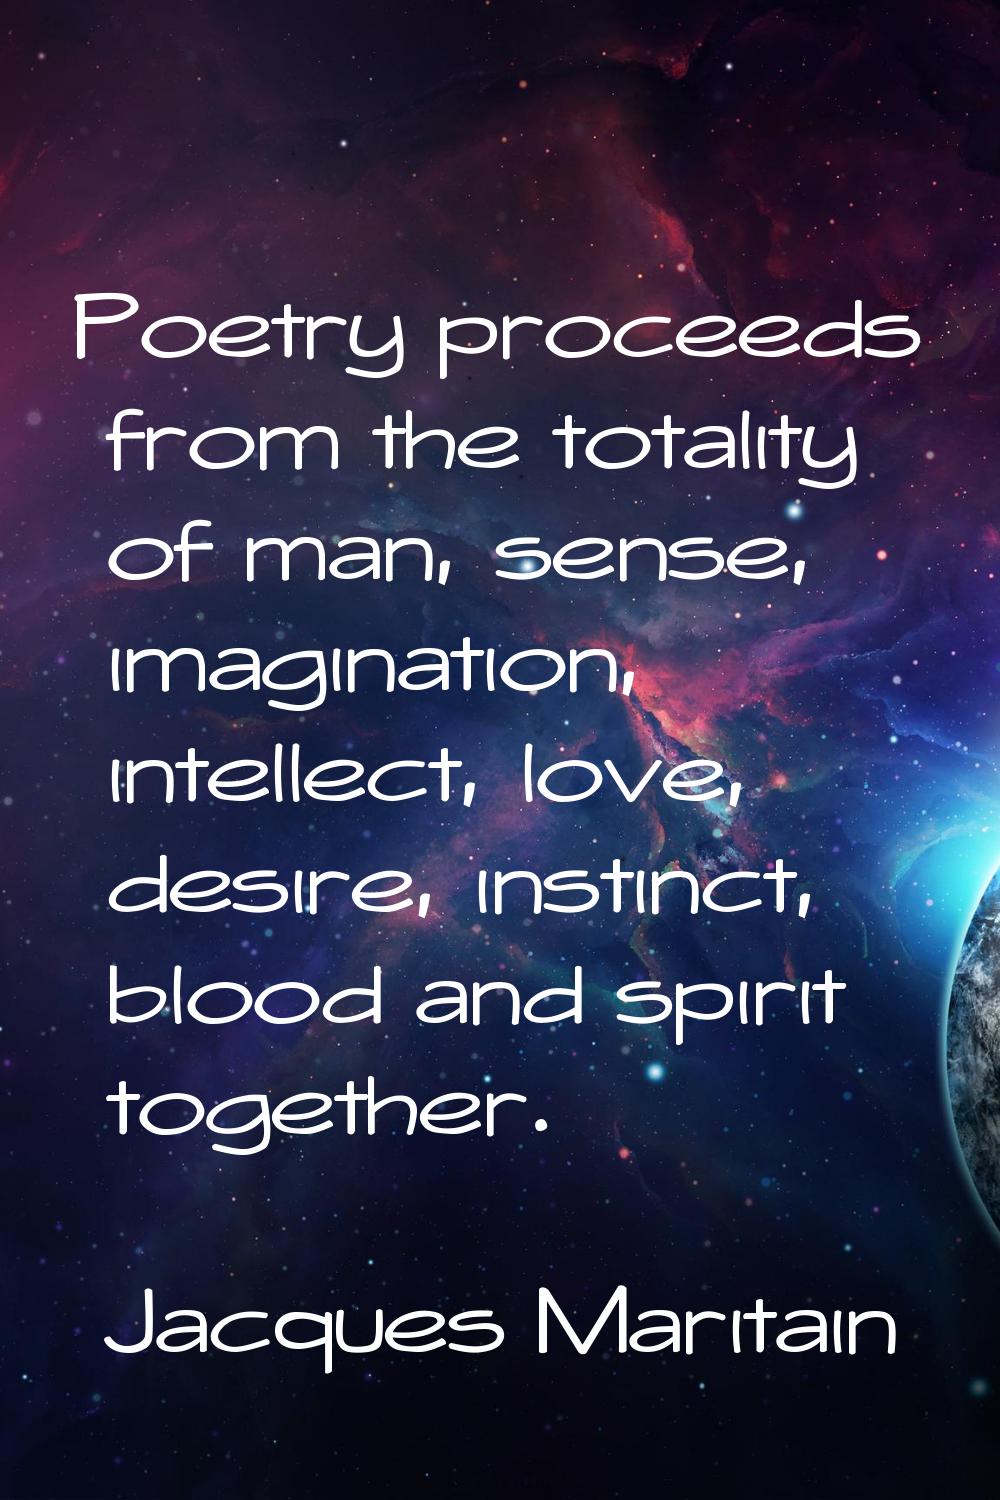 Poetry proceeds from the totality of man, sense, imagination, intellect, love, desire, instinct, bl